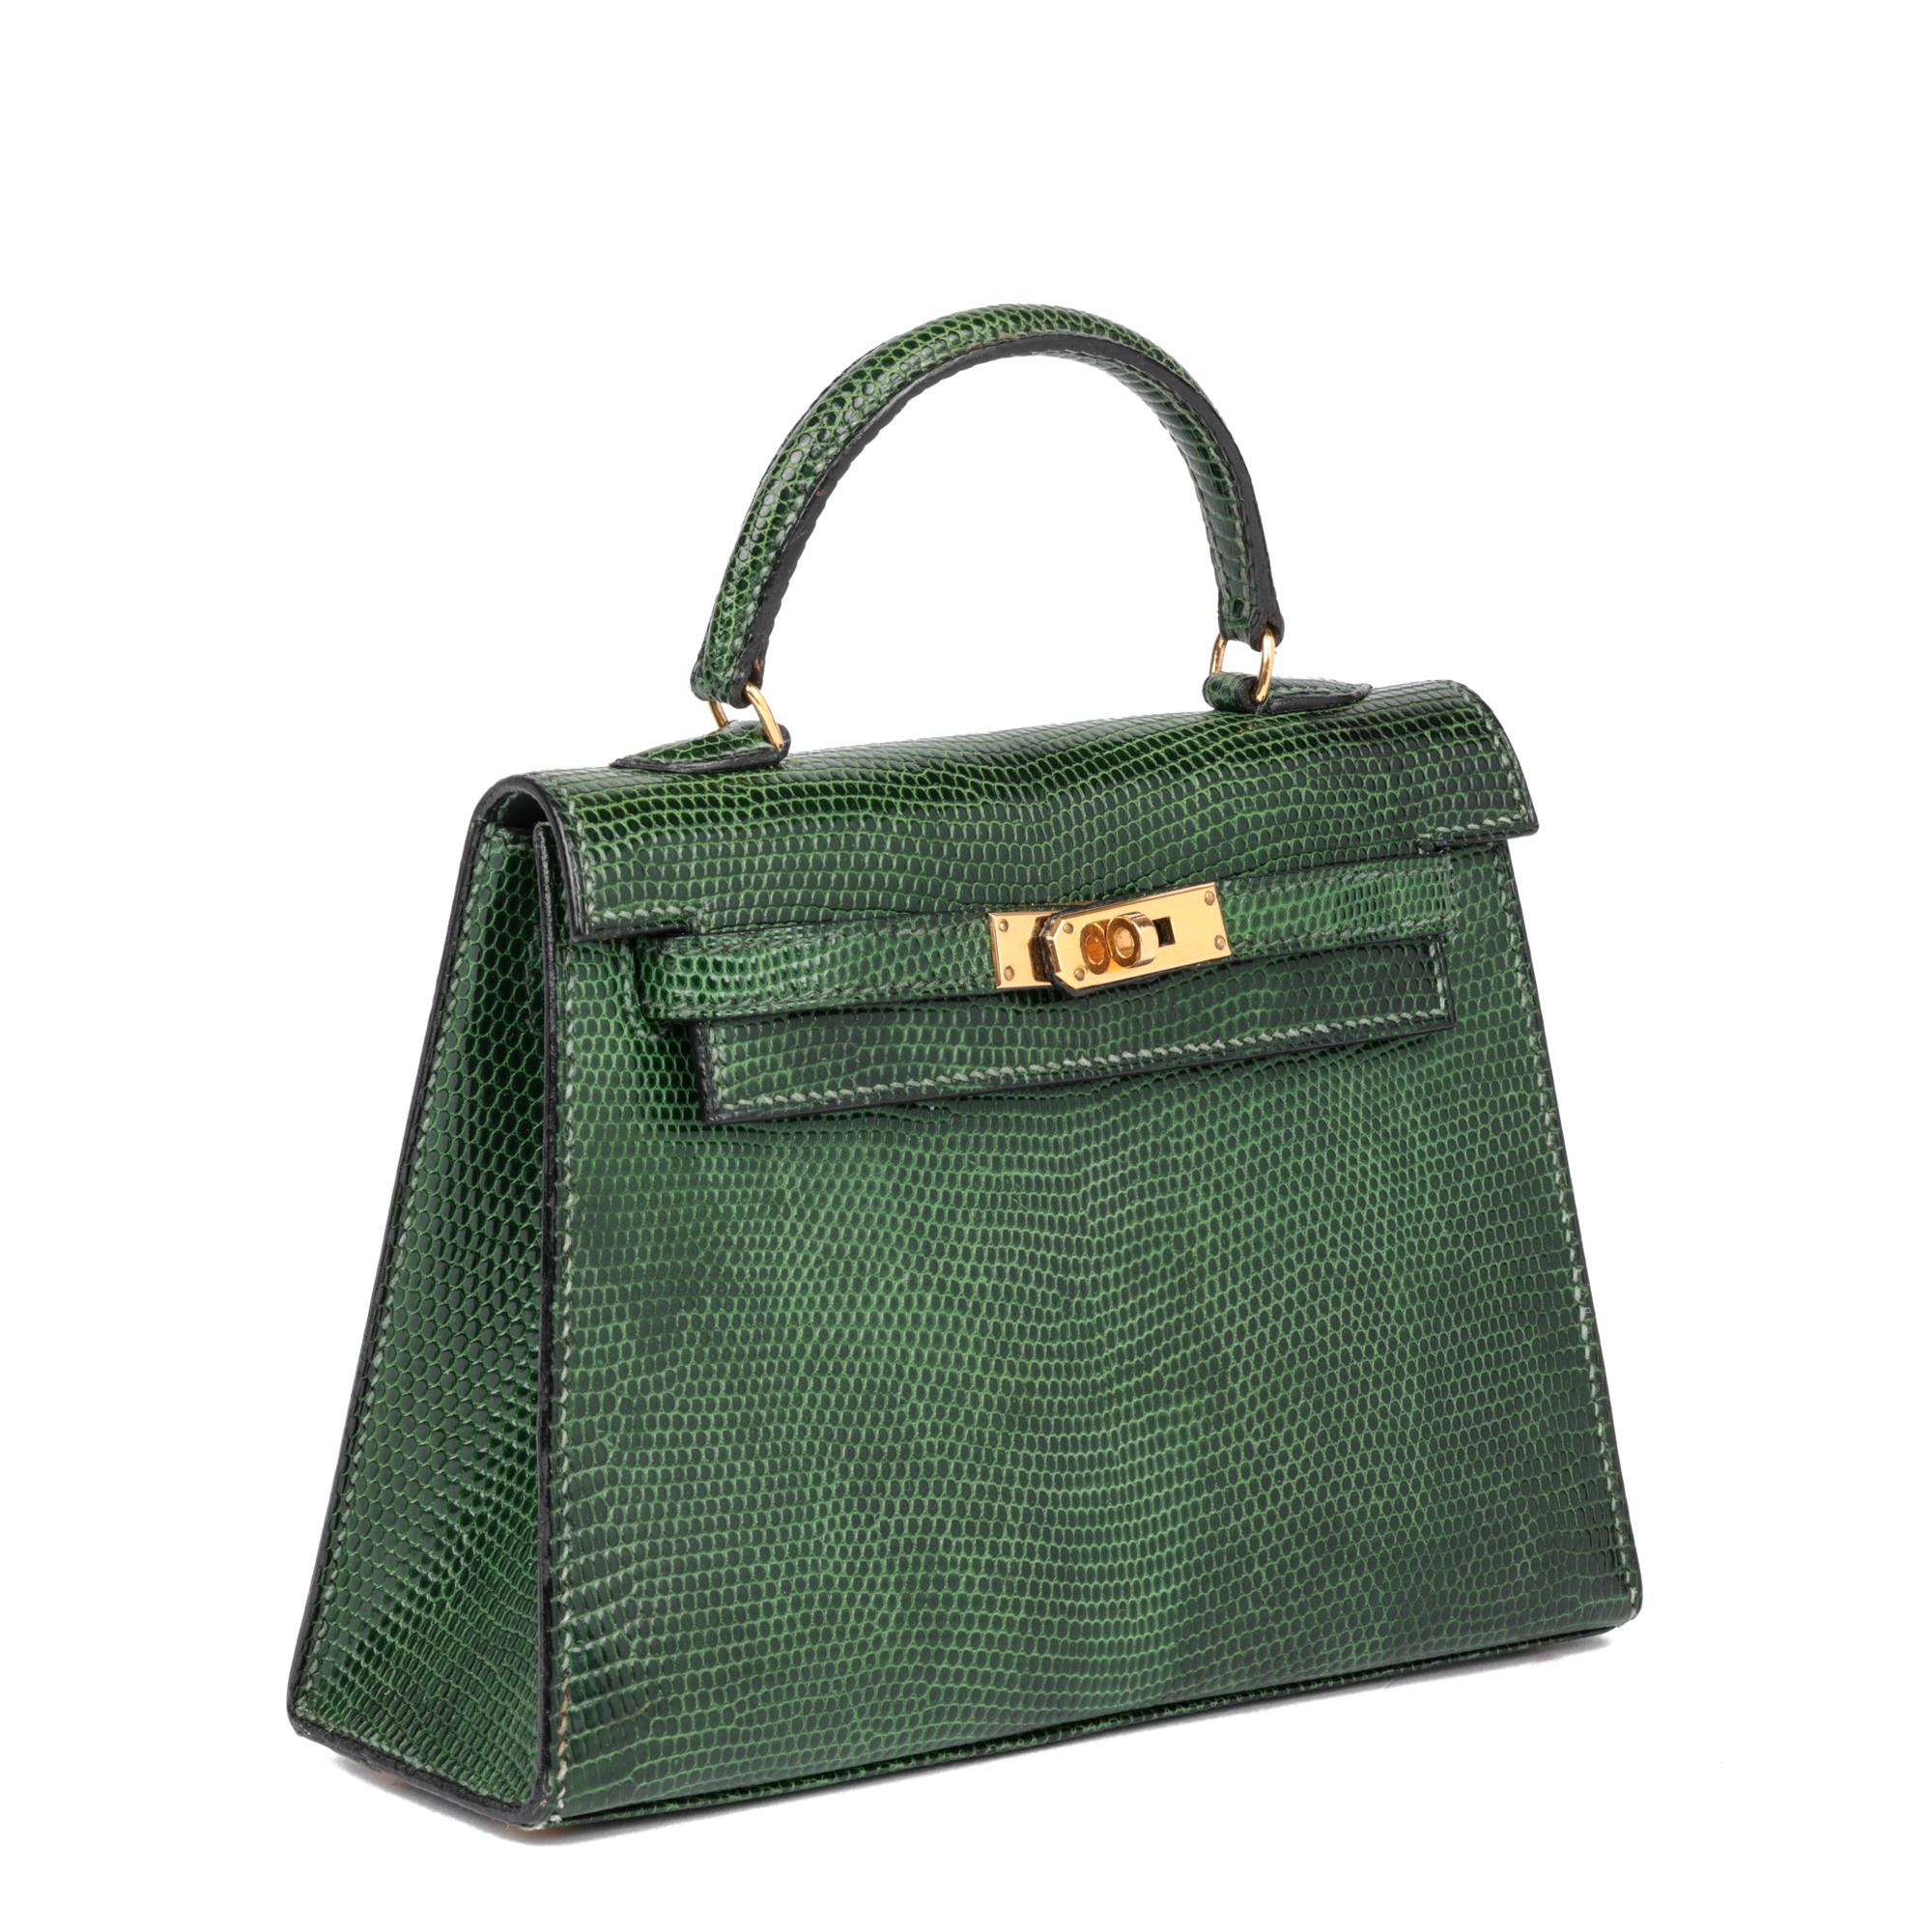 Hermès Vert Moyen Lizard Leather Special Order Vintage Convertible Kelly 15cm Sellier with Constance Belt

CONDITION NOTES
The exterior is in excellent condition with light signs of use.
The interior is in excellent condition with light signs of